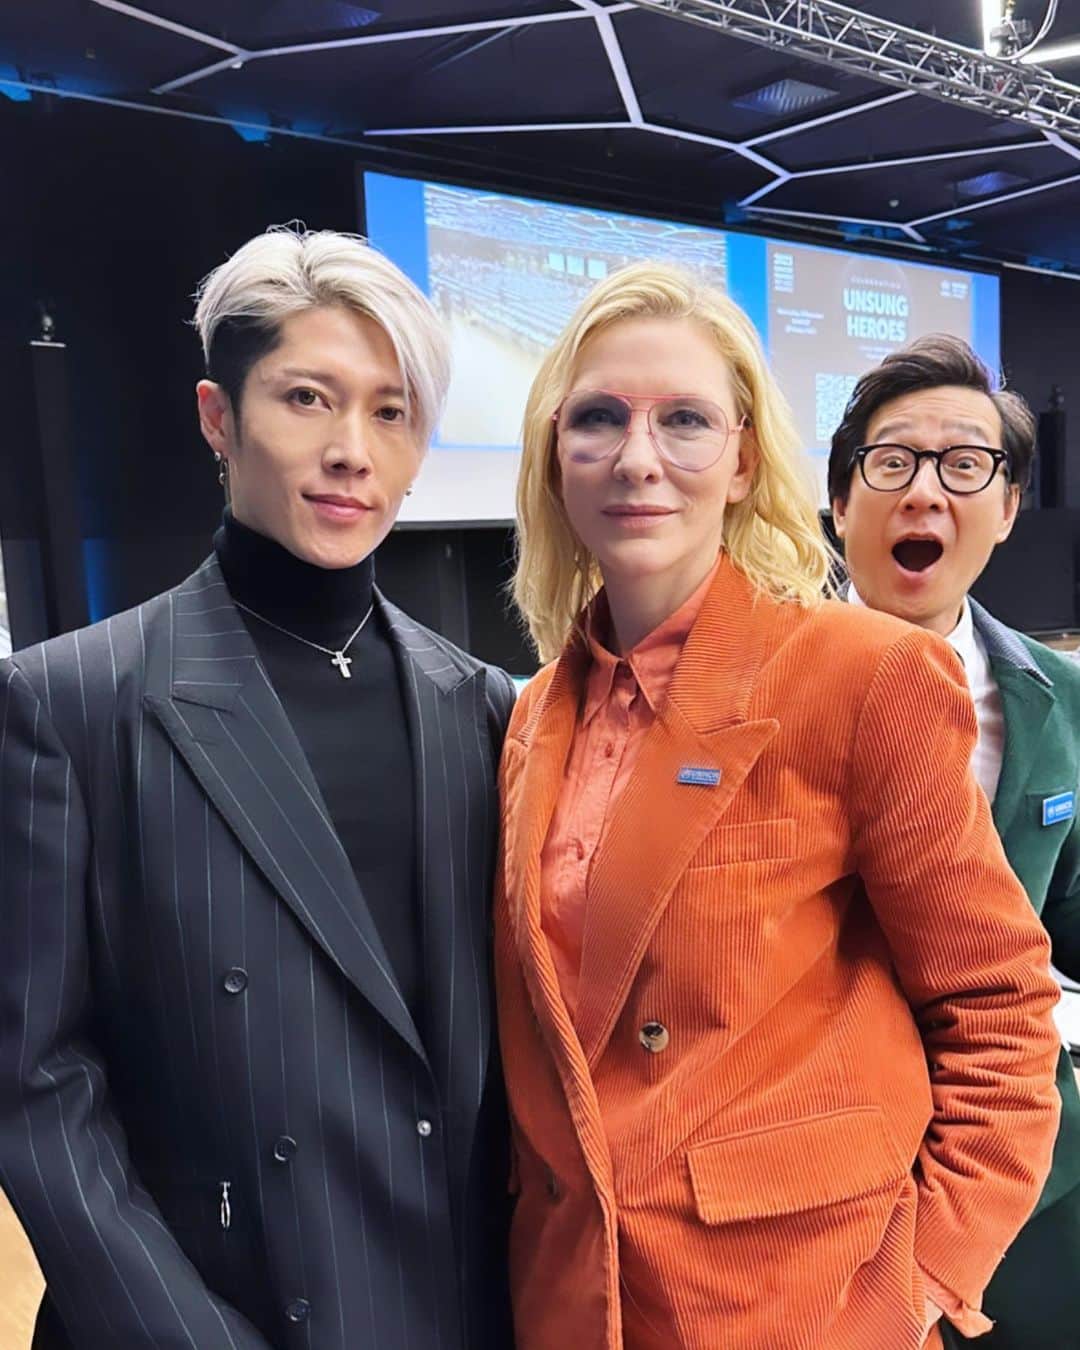 雅-MIYAVI-のインスタグラム：「With one of the most passionate and dedicated Goodwill Ambassadors, #CateBlanchett and the great actor, the loveliest man on earth, also a pro photo-bomber @kehuyquan   They shared such a powerful performance featuring a poem by @jj_bola at the opening plenary of #GlobalRefugeeForum in Geneva.  Even as an ambassador, There are times I feel powerless, realizing I can’t do many things on my own. However, witnessing others giving their best and dedicating themselves makes me feel so strong.   Not only them, but also numerous people from all around the world gather at this event to address the ongoing refugee crisis. Discuss, share activities, experiences, thoughts, and exchange new ideas in an effort to find solutions.   I reaffirmed my commitment to do my best with whatever I can contribute as an ambassador and an artist.  女優、そして親善大使としても献身的に活動するケイトブランシェットさんと(そして今地球上で一番愛されている俳優であり、写真ボマーのキーホイさん)  ジュネーブにて開催されているグローバル難民フォーラム開会式にて、JJボラ さんの詩とともに力強いパフォーマンスを披露してくれました。  アンバサダーであっても、自分一人ではできないことがたくさんあることを知り、無力さを感じることがあります。それでも他のみんながそれぞれのやり方でベストを尽くして活動しているのを見る度、とても心強く感じます。  彼らだけでなく、世界中からたくさんの人々がこのイベントに集まり、今起こっている難民危機を解決すべく、議論し、自分たちの活動をシェアして、新しいアイデアを共有しながらより良い解決策を模索していきます。  改めて自分自身も自分にできることをやっていこうと決心しました。」